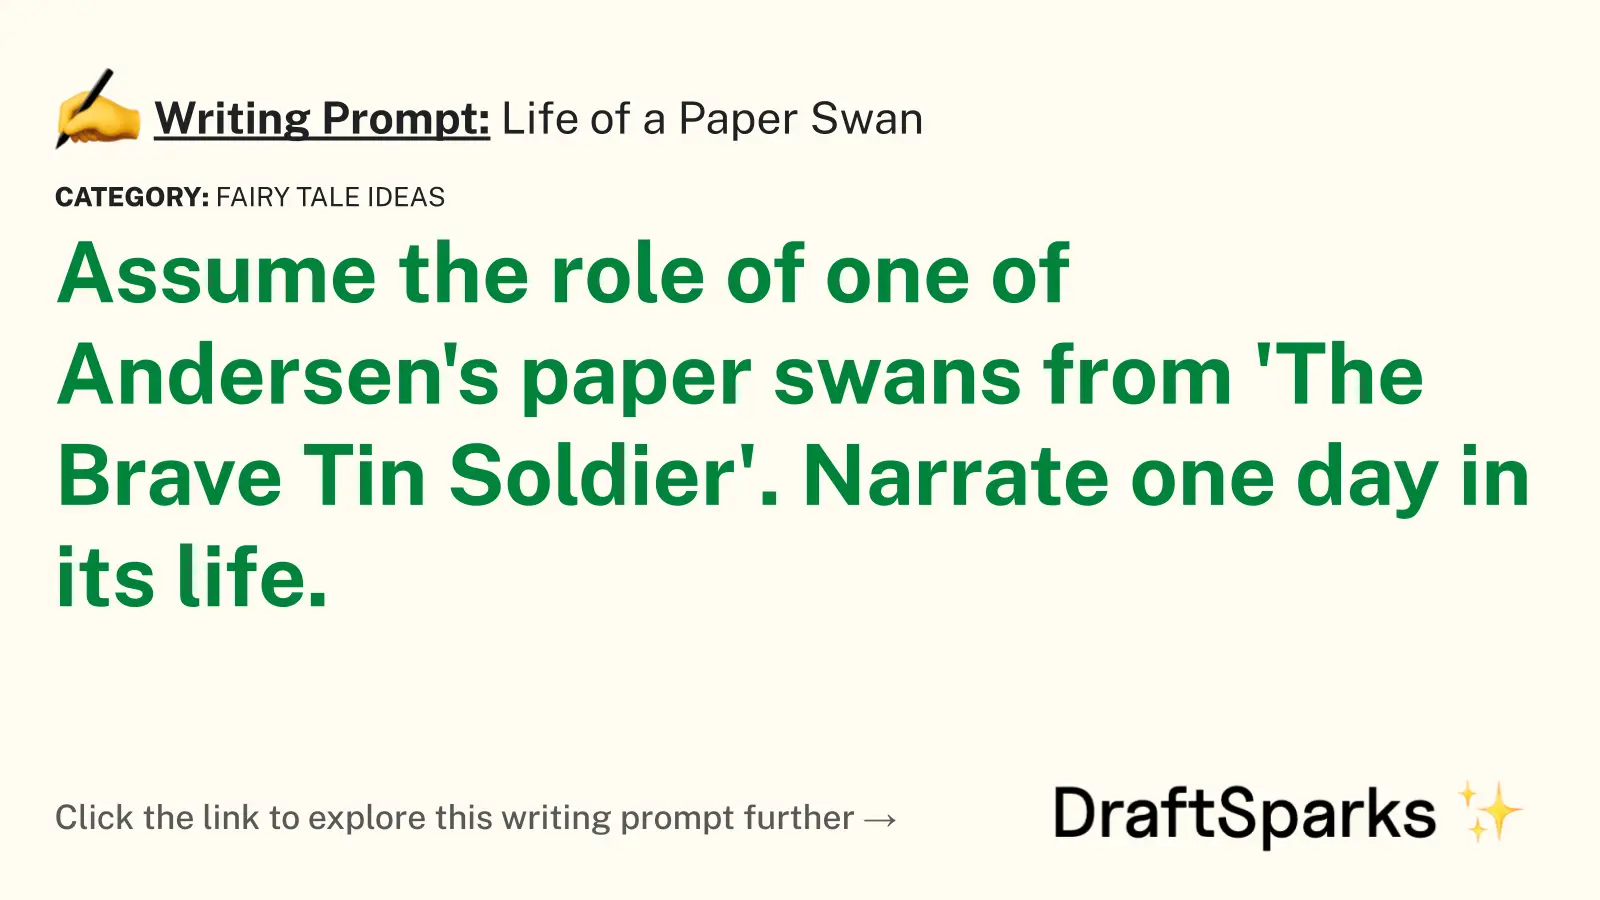 Life of a Paper Swan